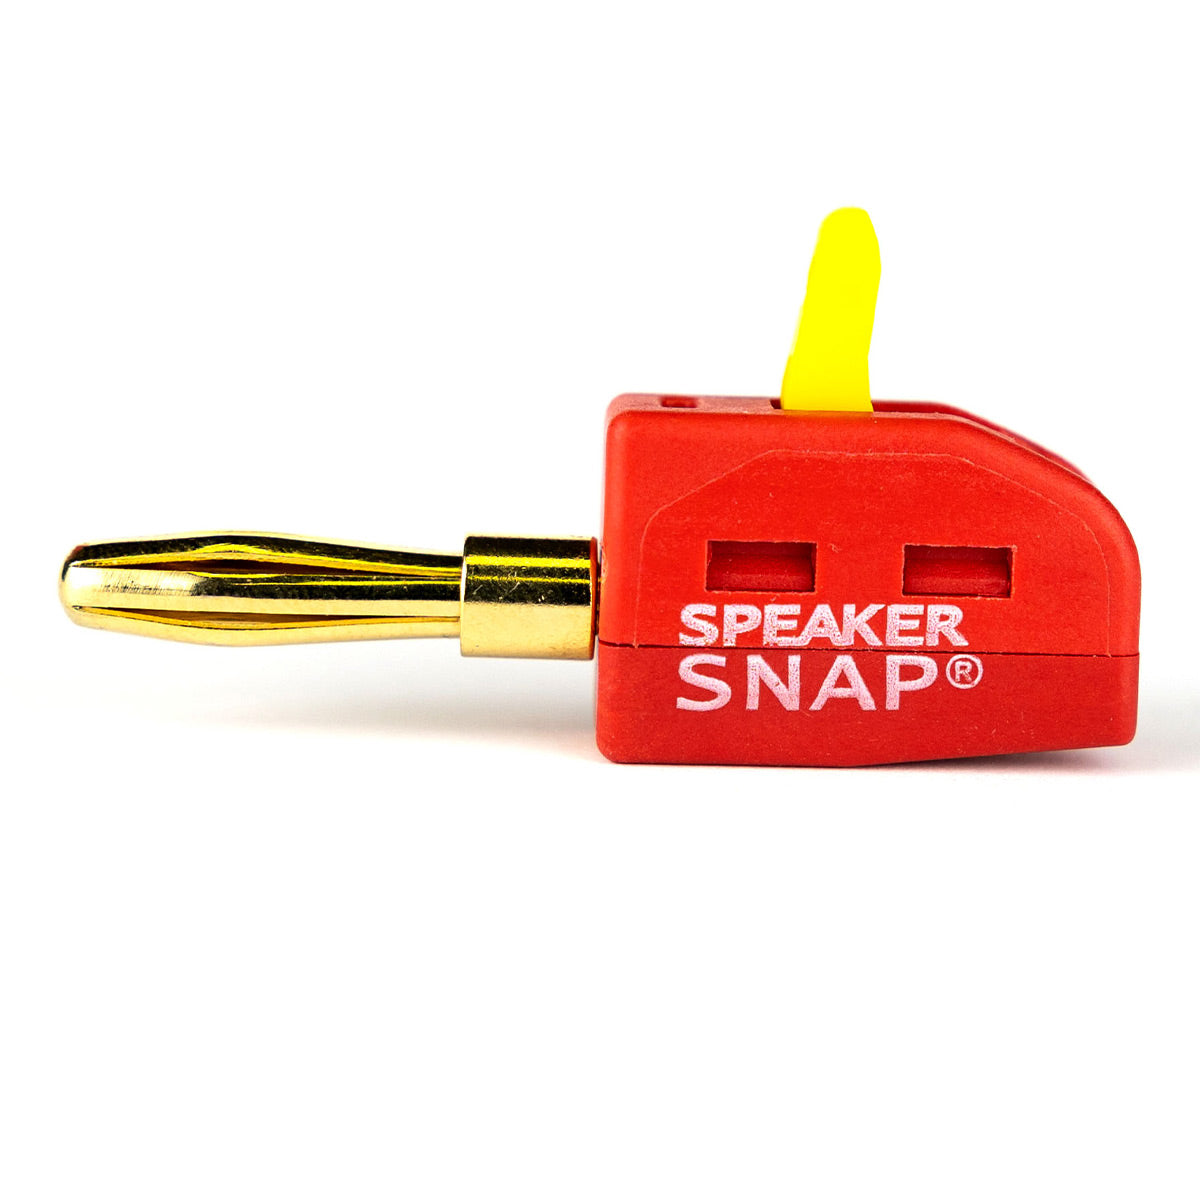 Speaker Snap 4 Count of Fast & Secure Banana Plugs, Gold Plated, 12-24 AWG, for Home Theaters, Speaker Wire, Wall Plates, and Receivers